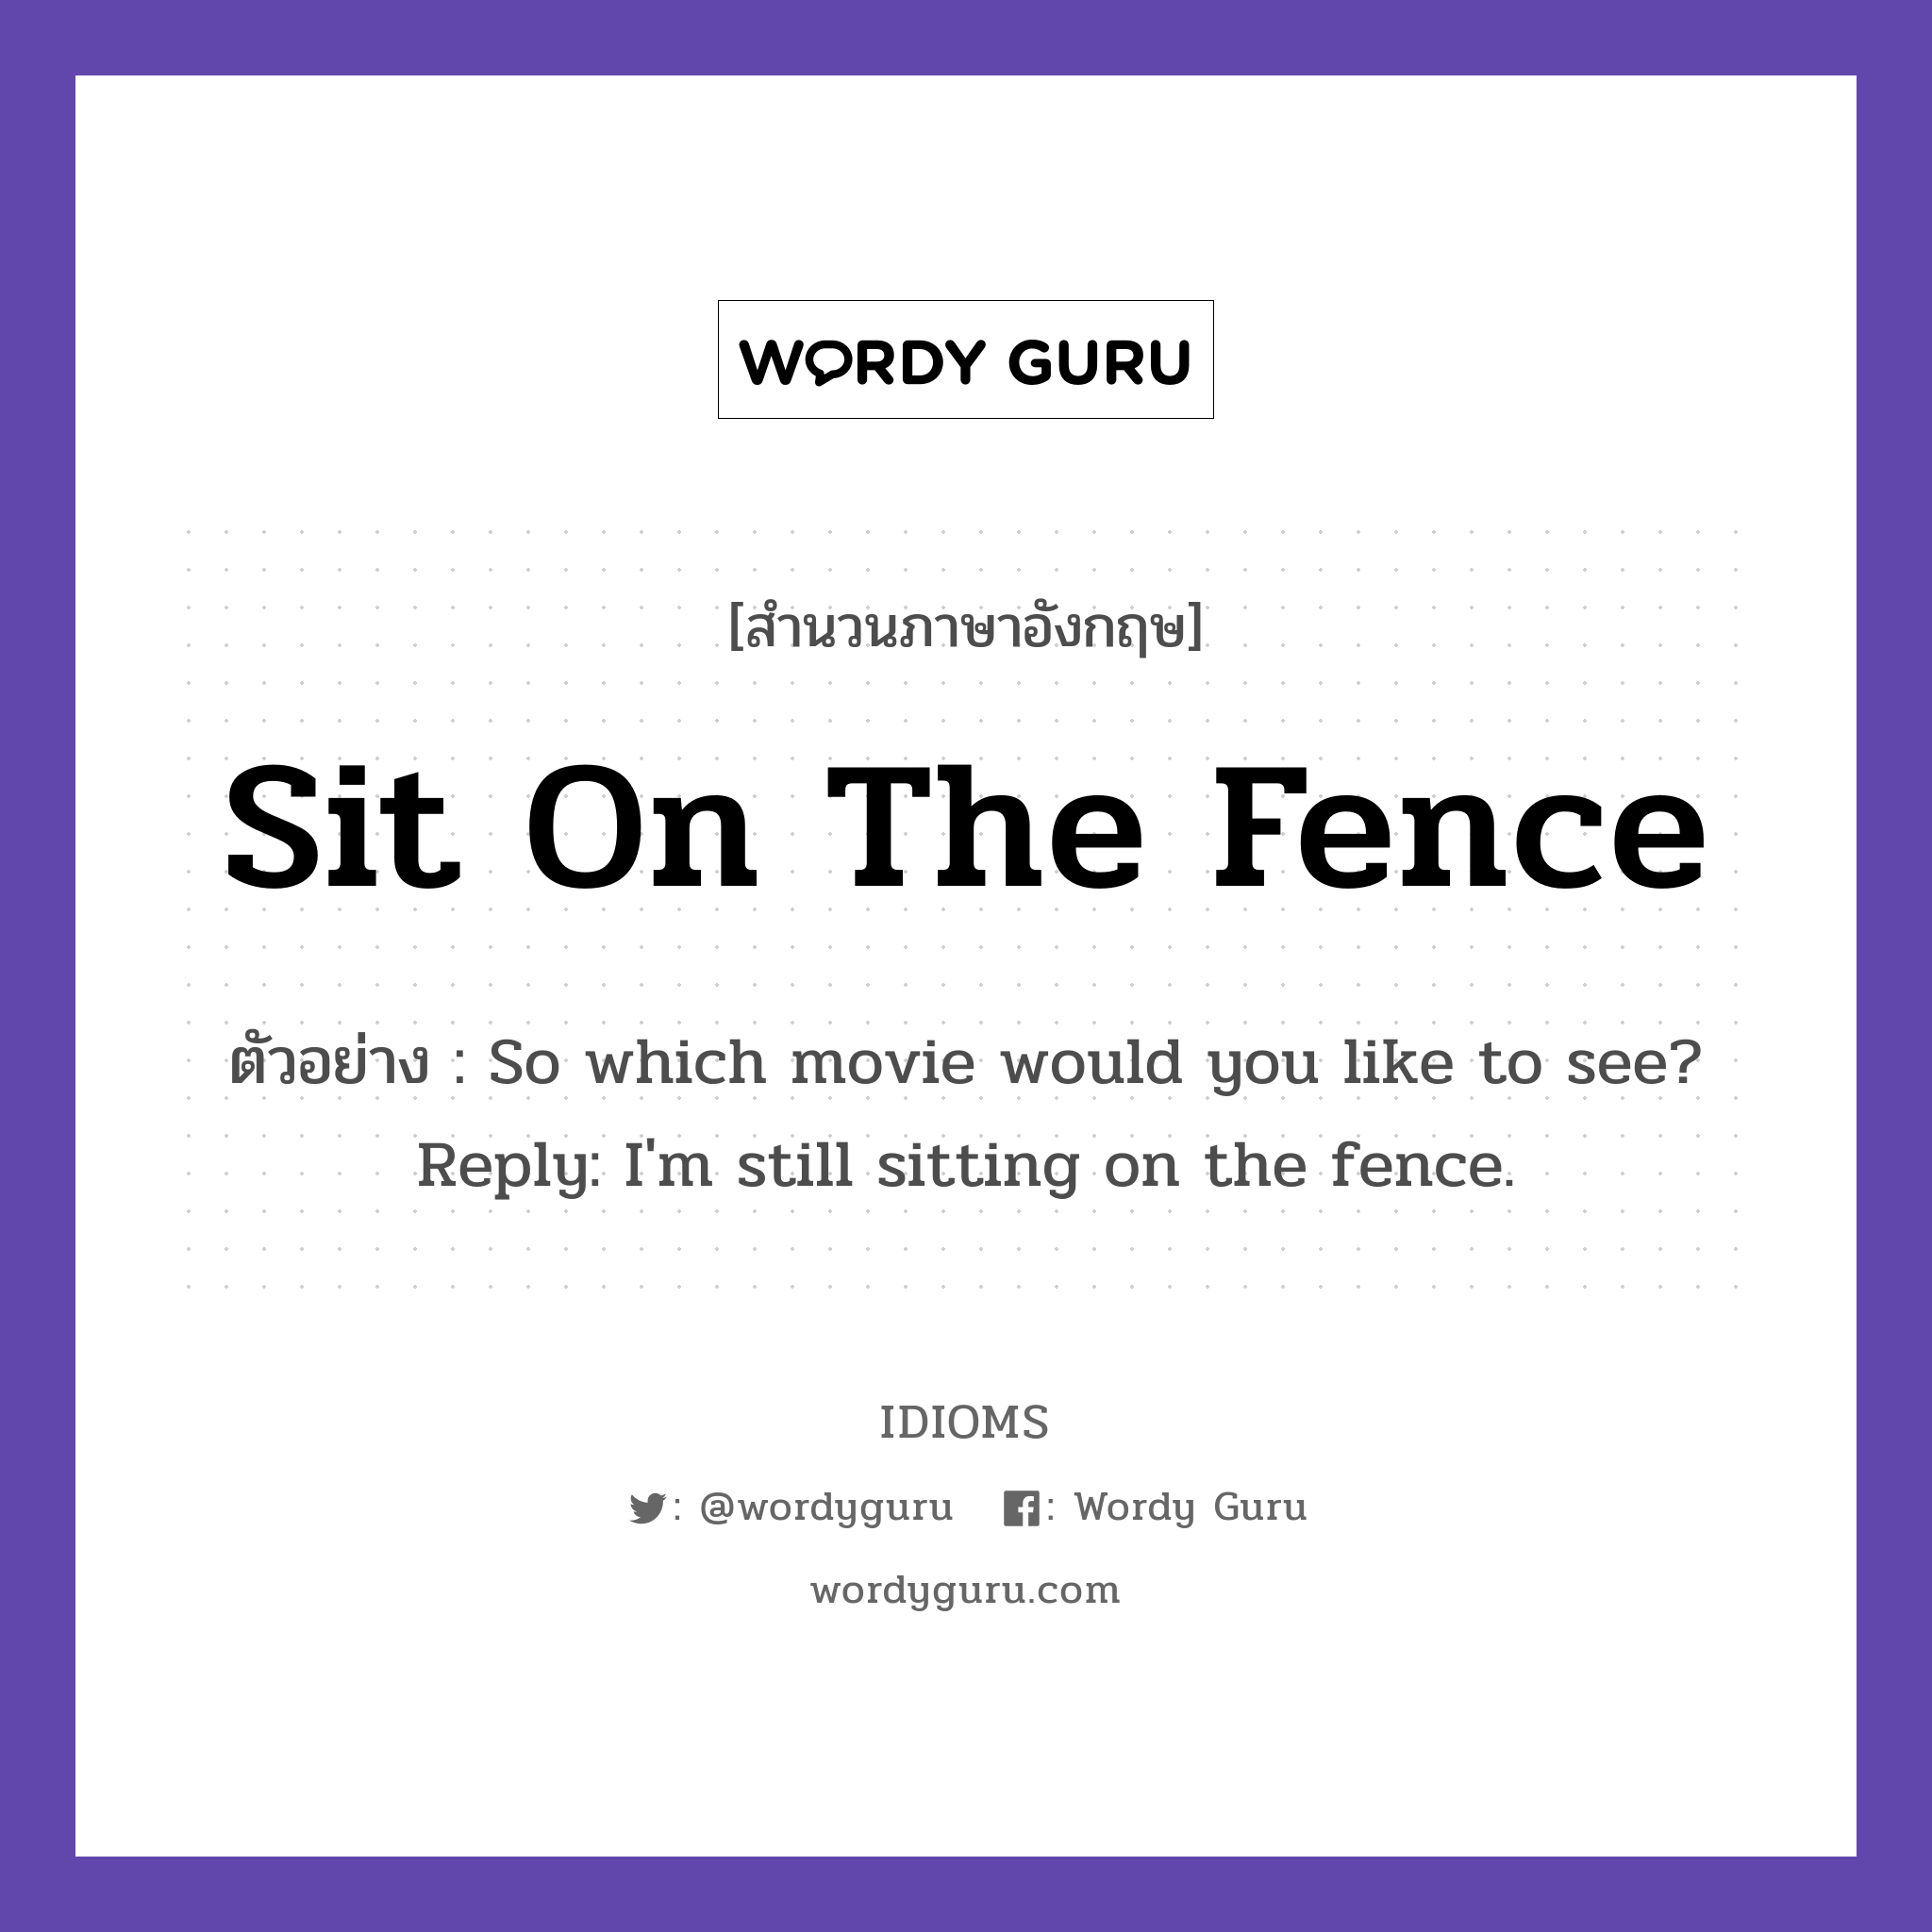 Sit On The Fence แปลว่า?, สำนวนภาษาอังกฤษ Sit On The Fence ตัวอย่าง So which movie would you like to see? Reply: I'm still sitting on the fence.